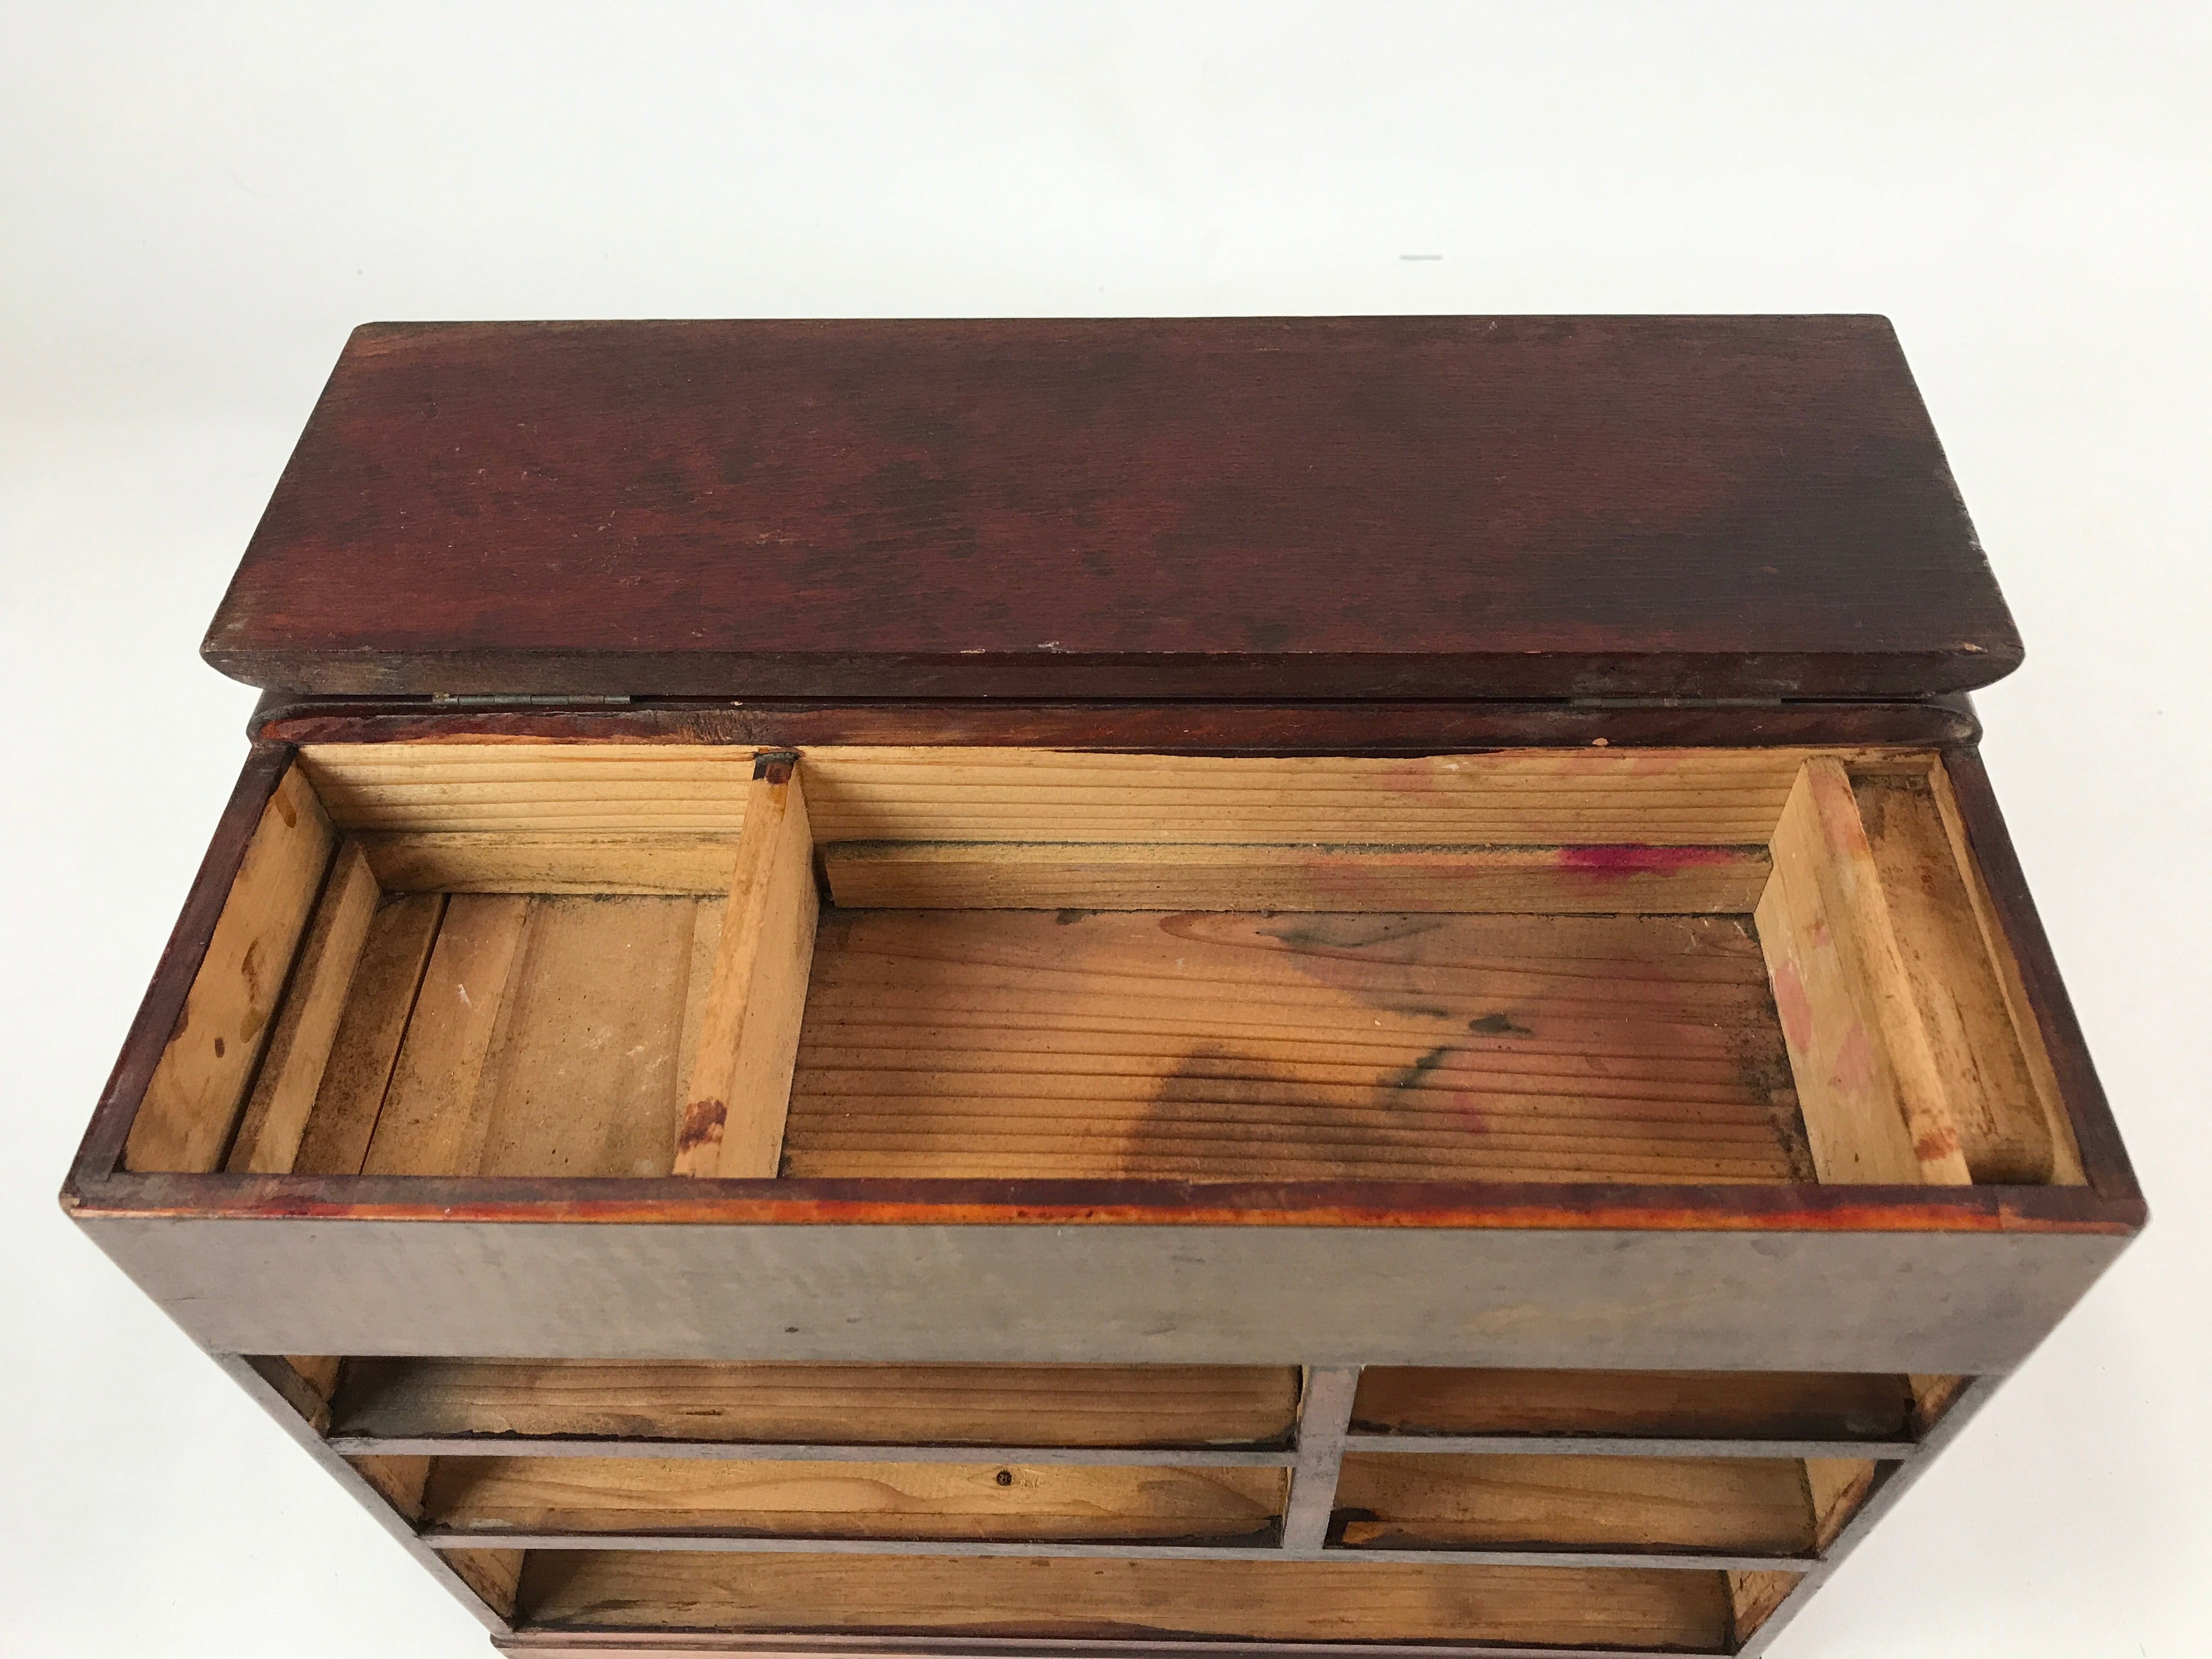 Japanese Wooden Sewing Box Haribako Vtg Tansu Chest 5 Drawers Brown T3, Online Shop